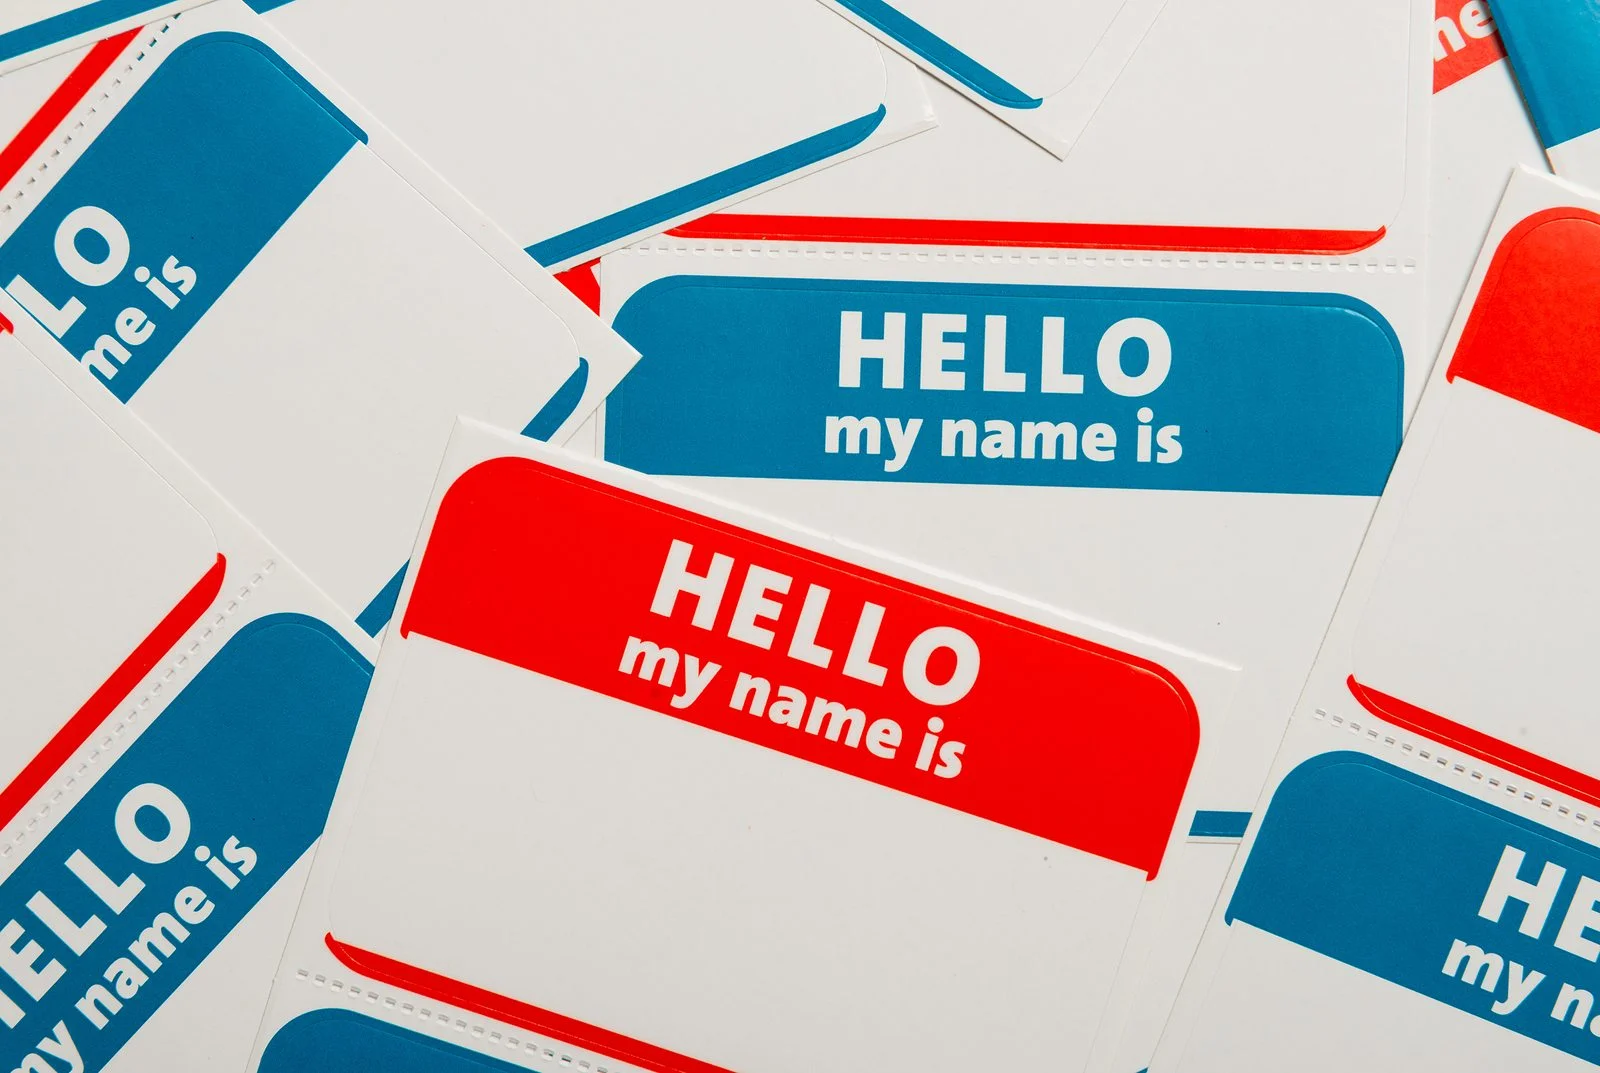 A stack of blue and red “Hello, my name is” name tags or badges